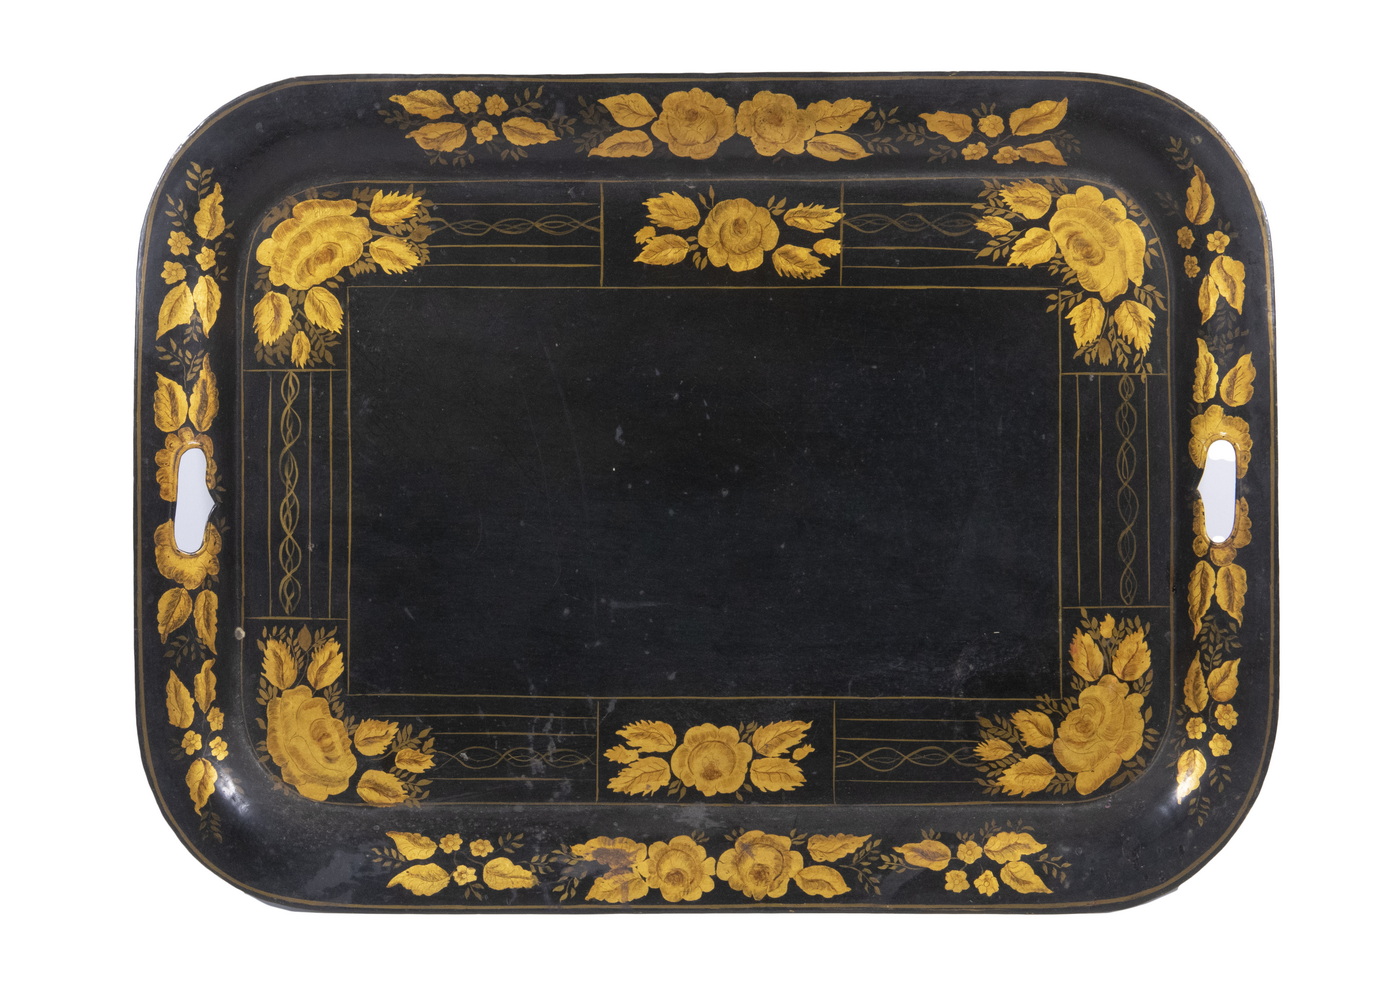 TOLE PAINTED TRAY 19th c Rectangular 30202c